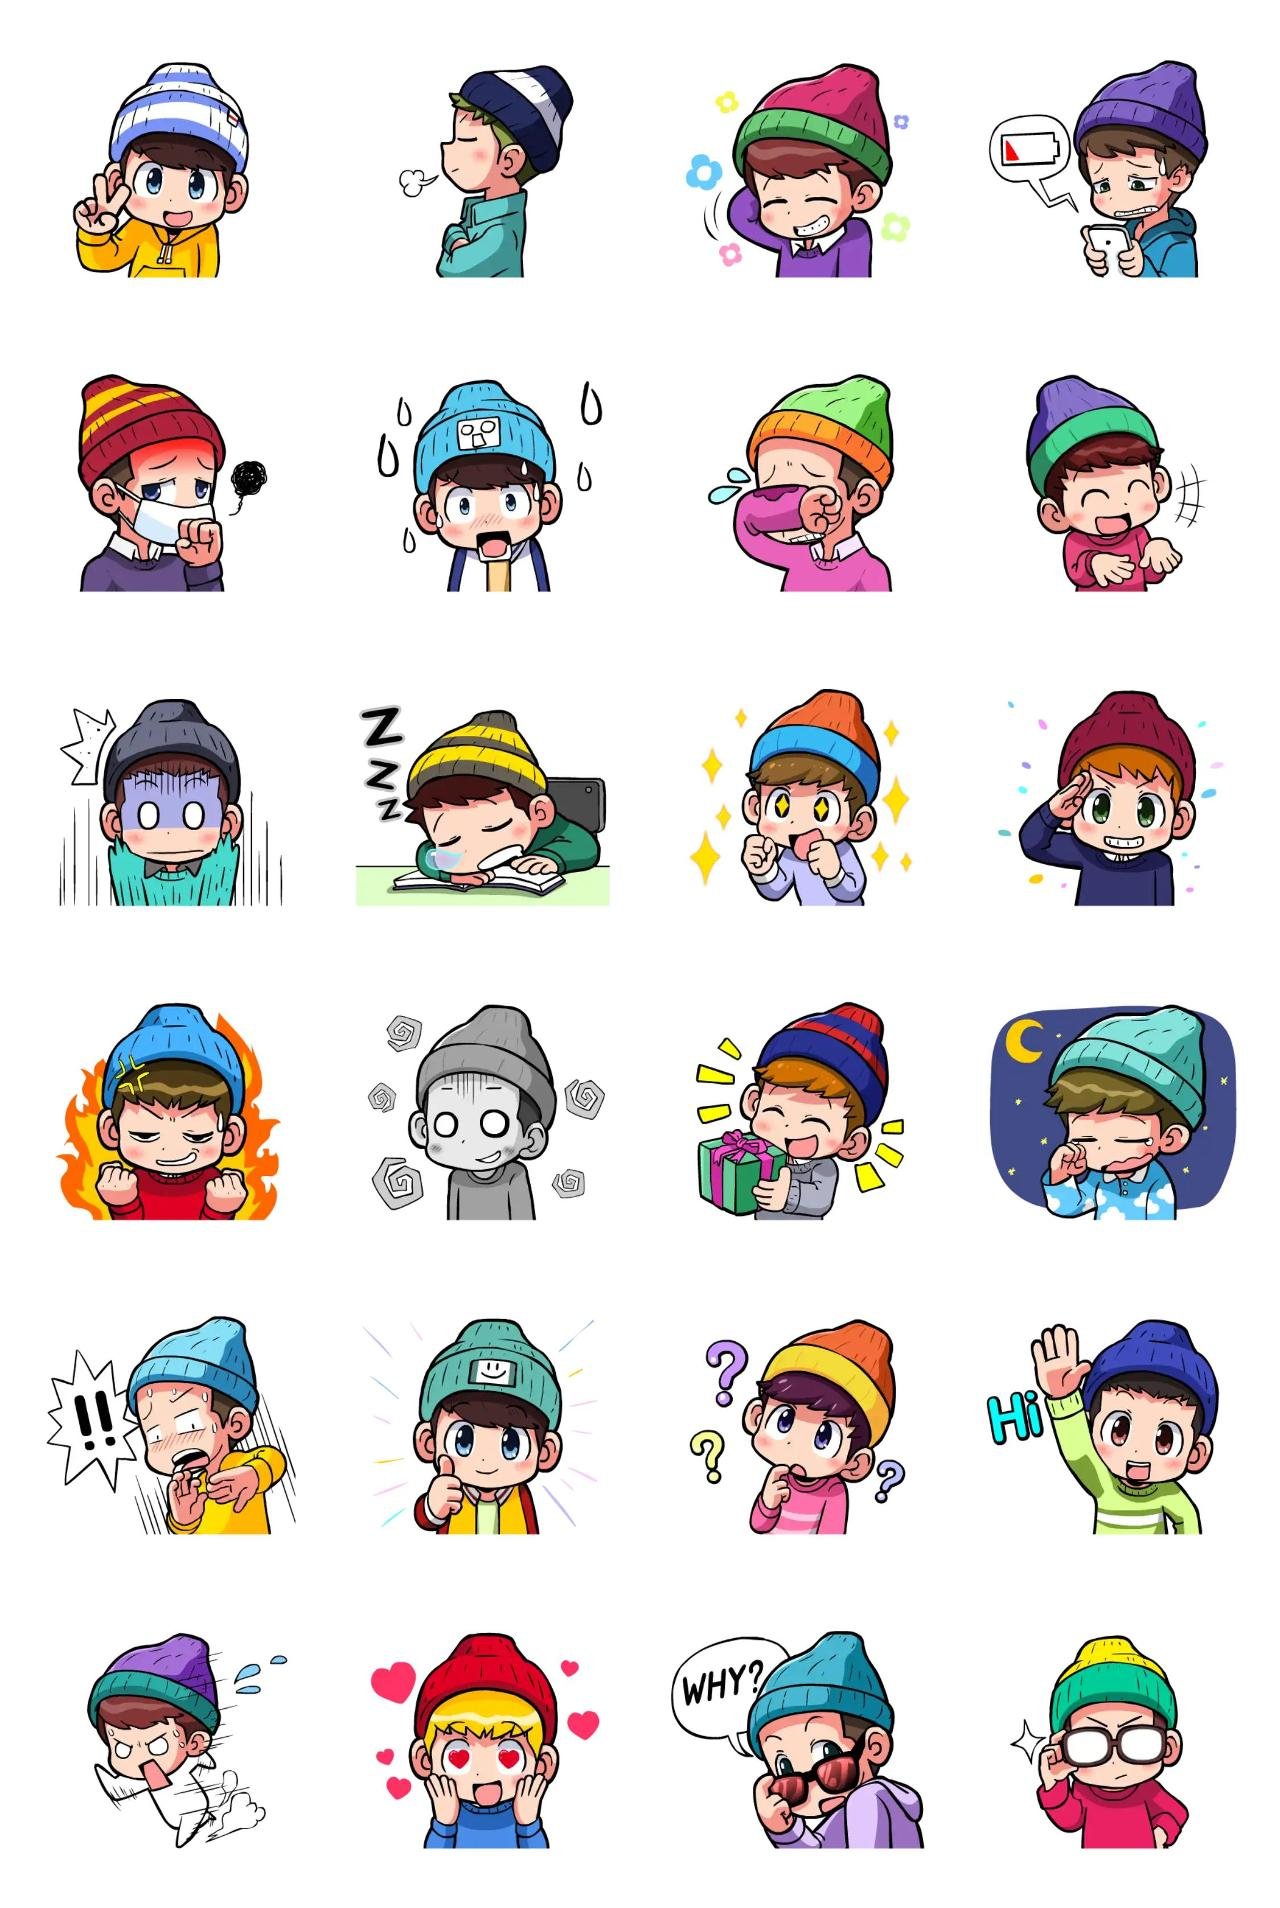 Beanie Boys Animation/Cartoon,People sticker pack for Whatsapp, Telegram, Signal, and others chatting and message apps